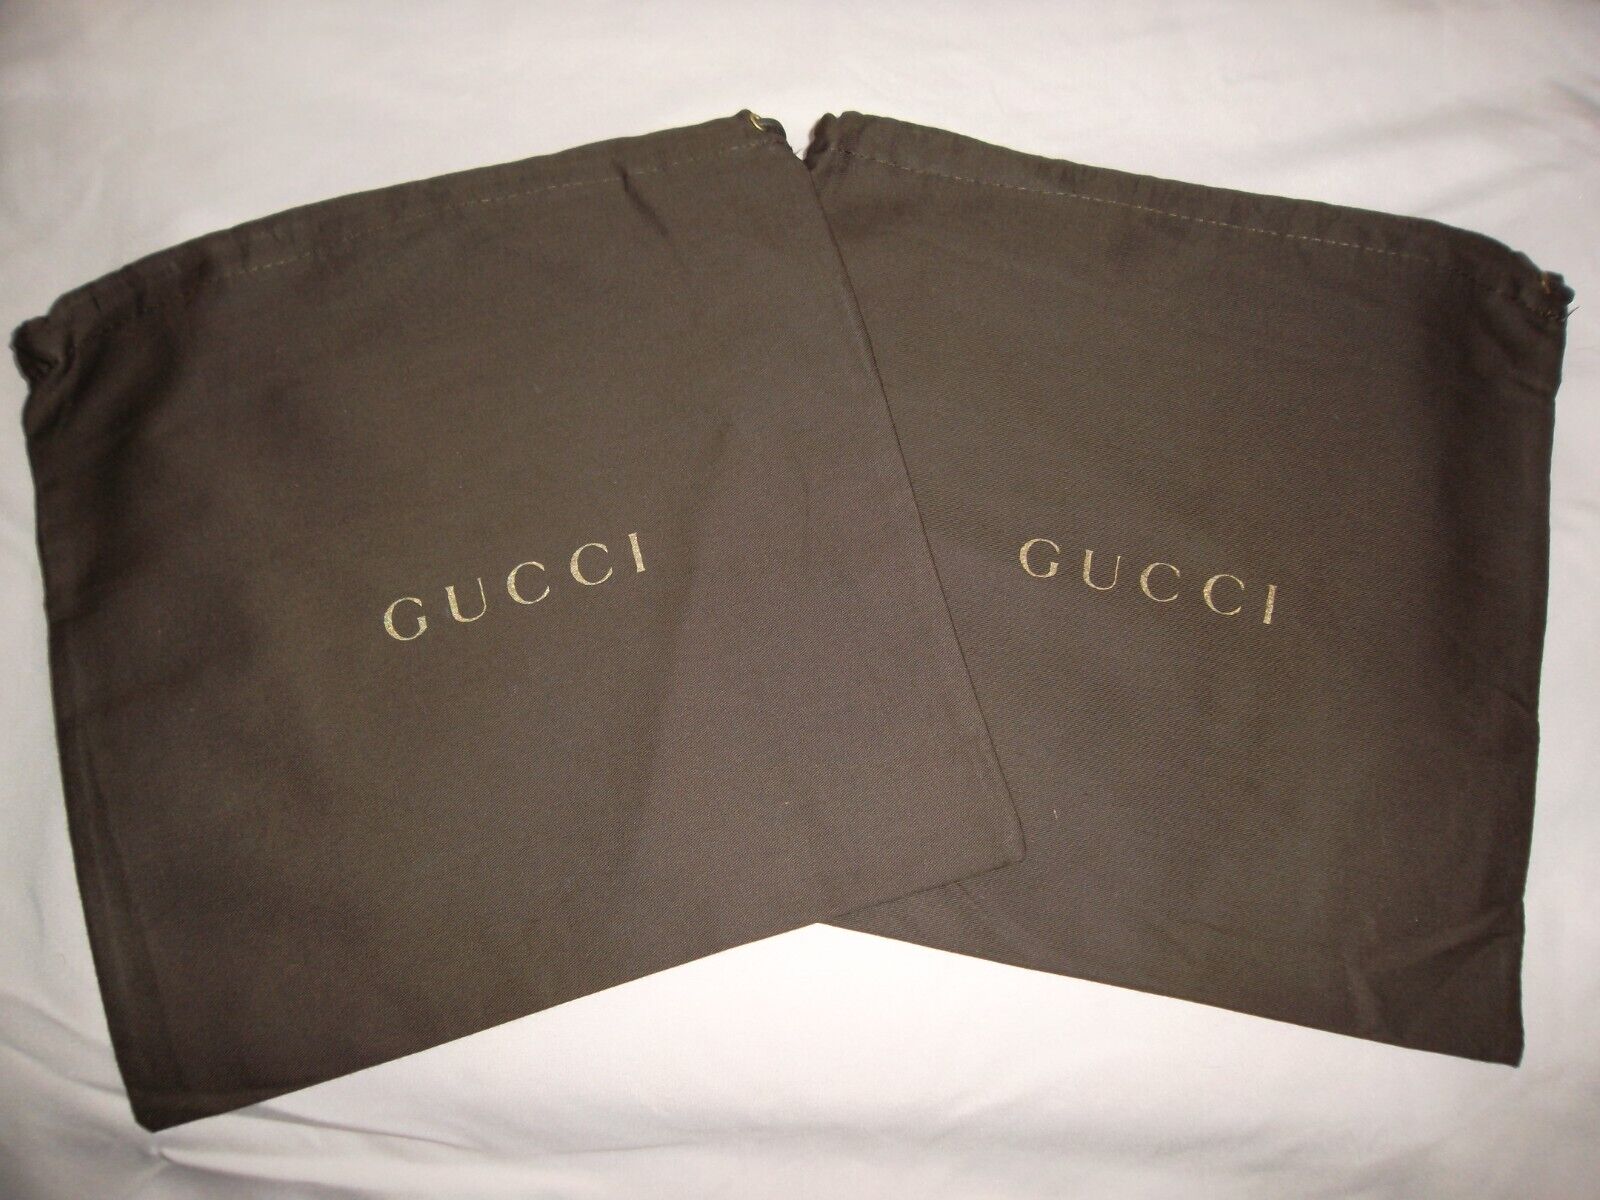 Lot 2 Gucci Drawstring bag, Dust Cover, Pouch  10" x 9.75"  New! Gucci